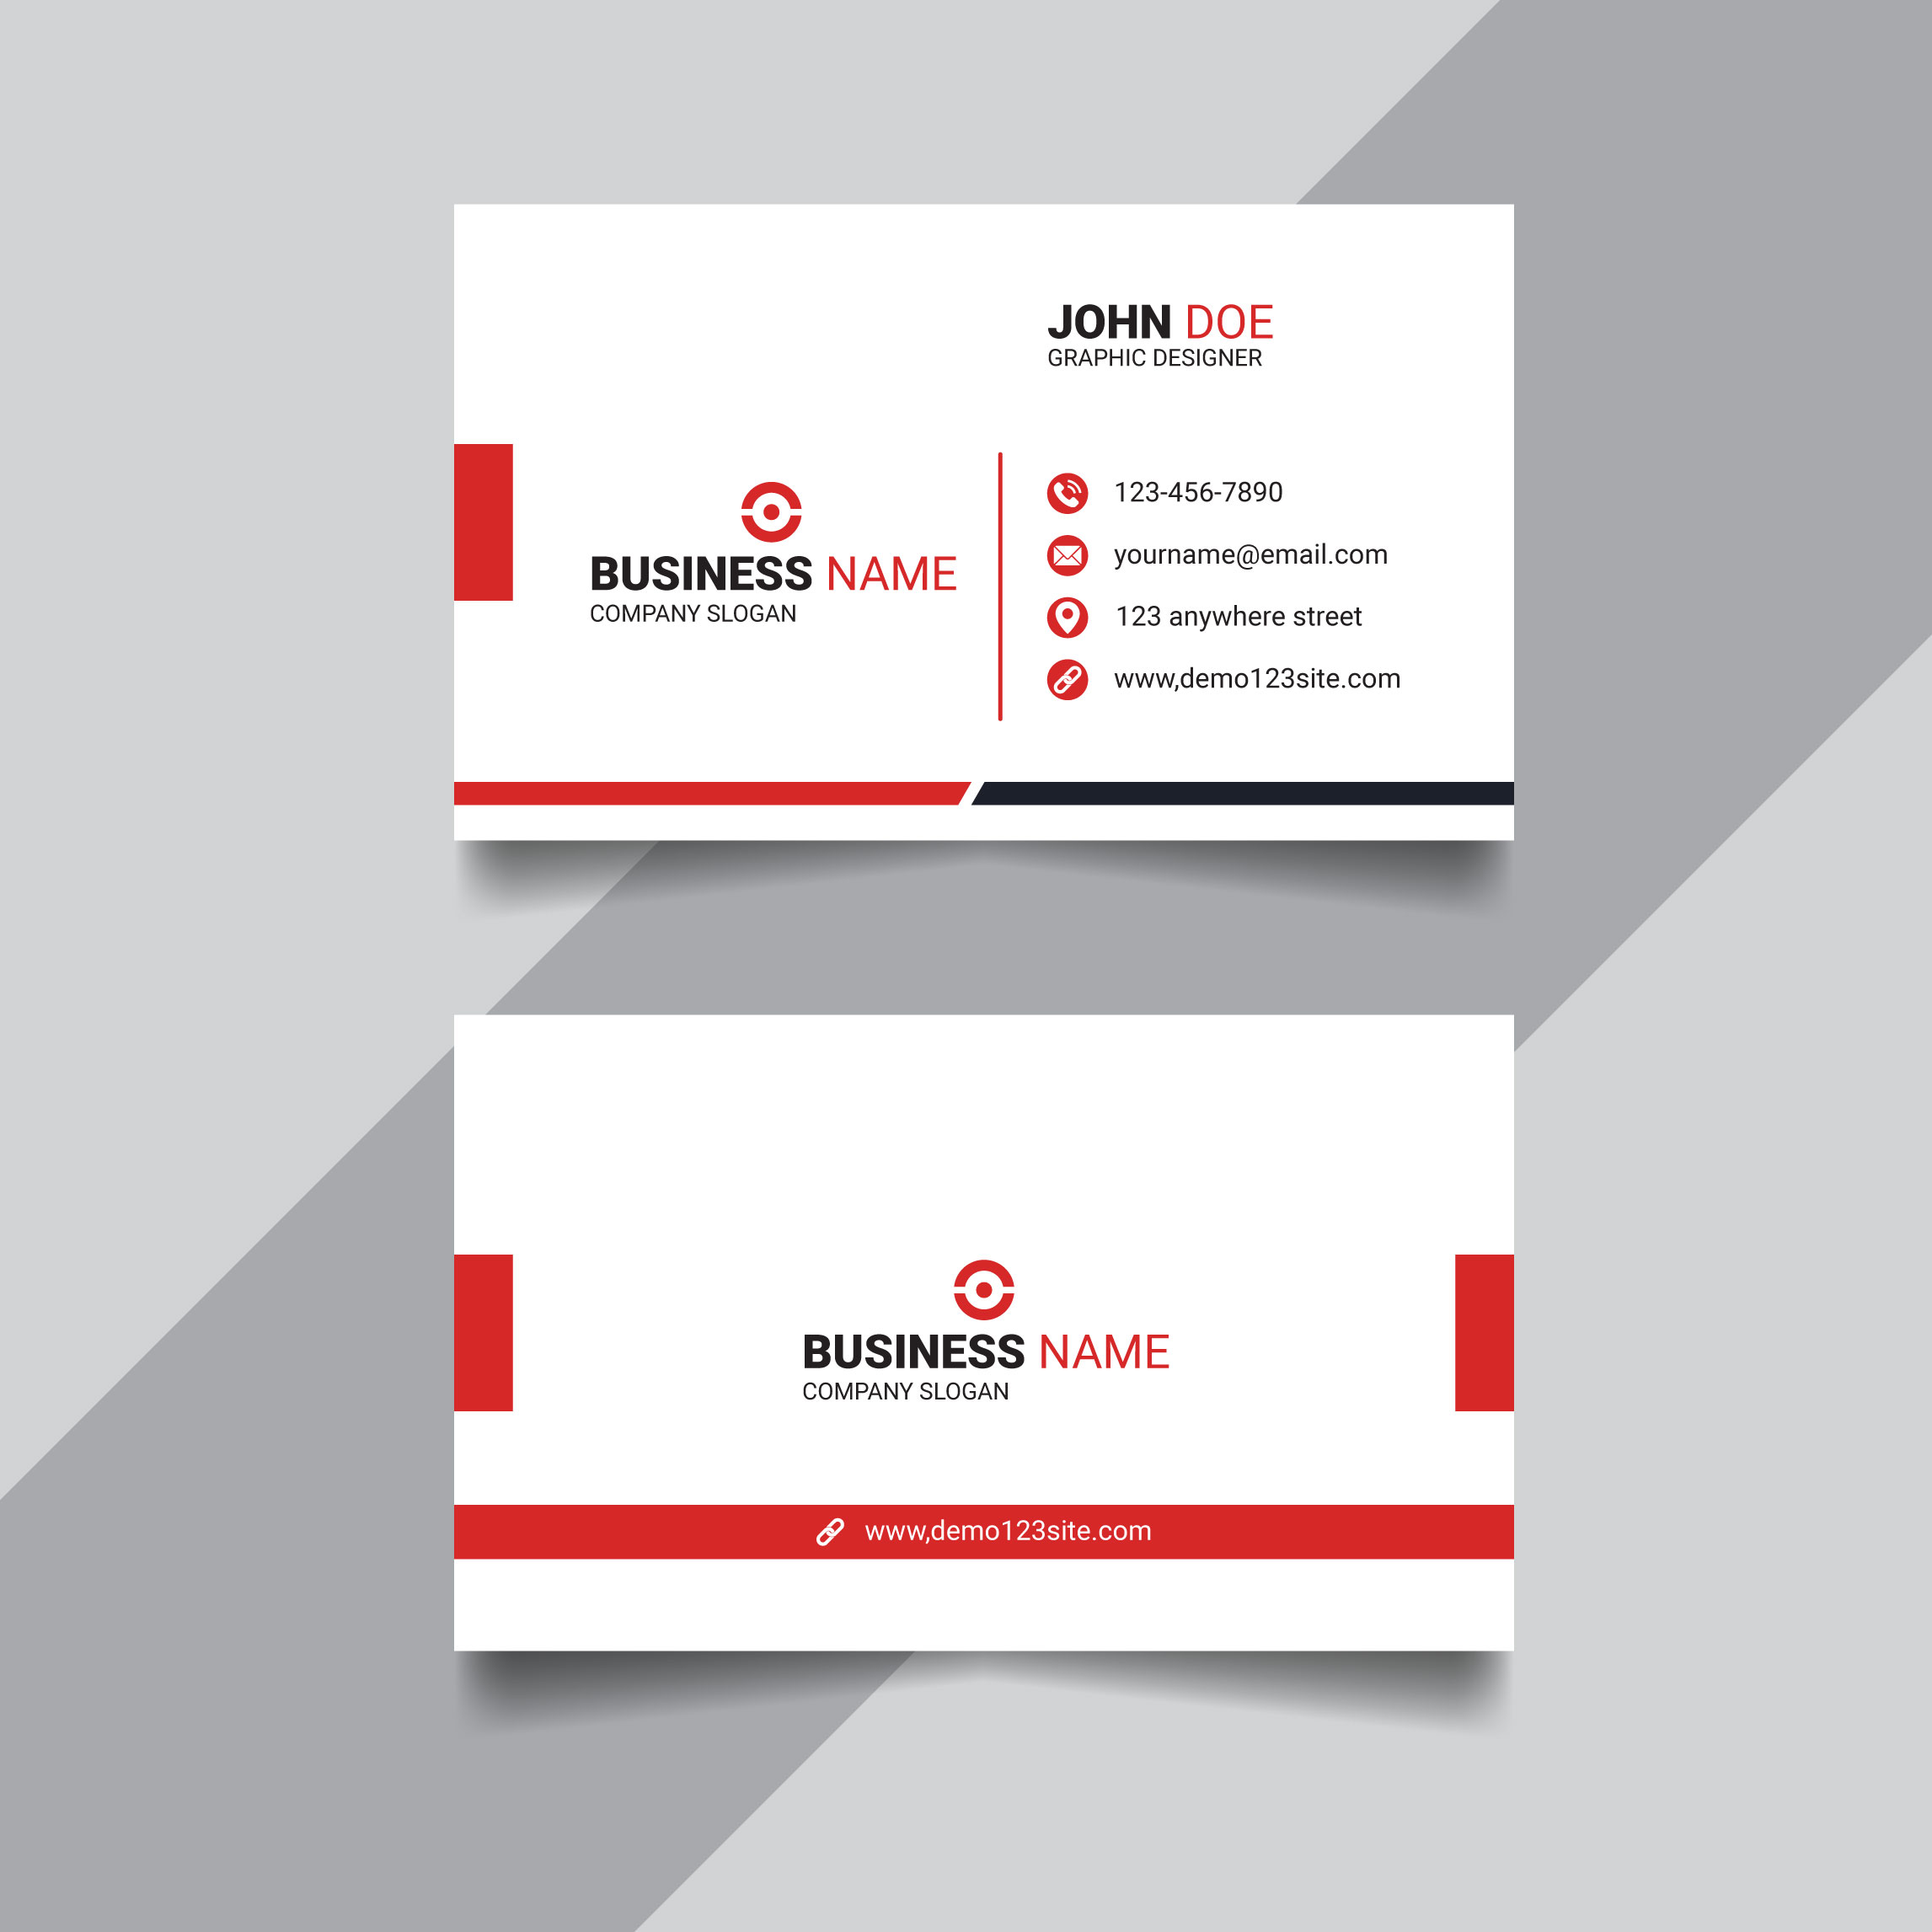 Corporate modern business card, Simple clean business card layout design cover image.